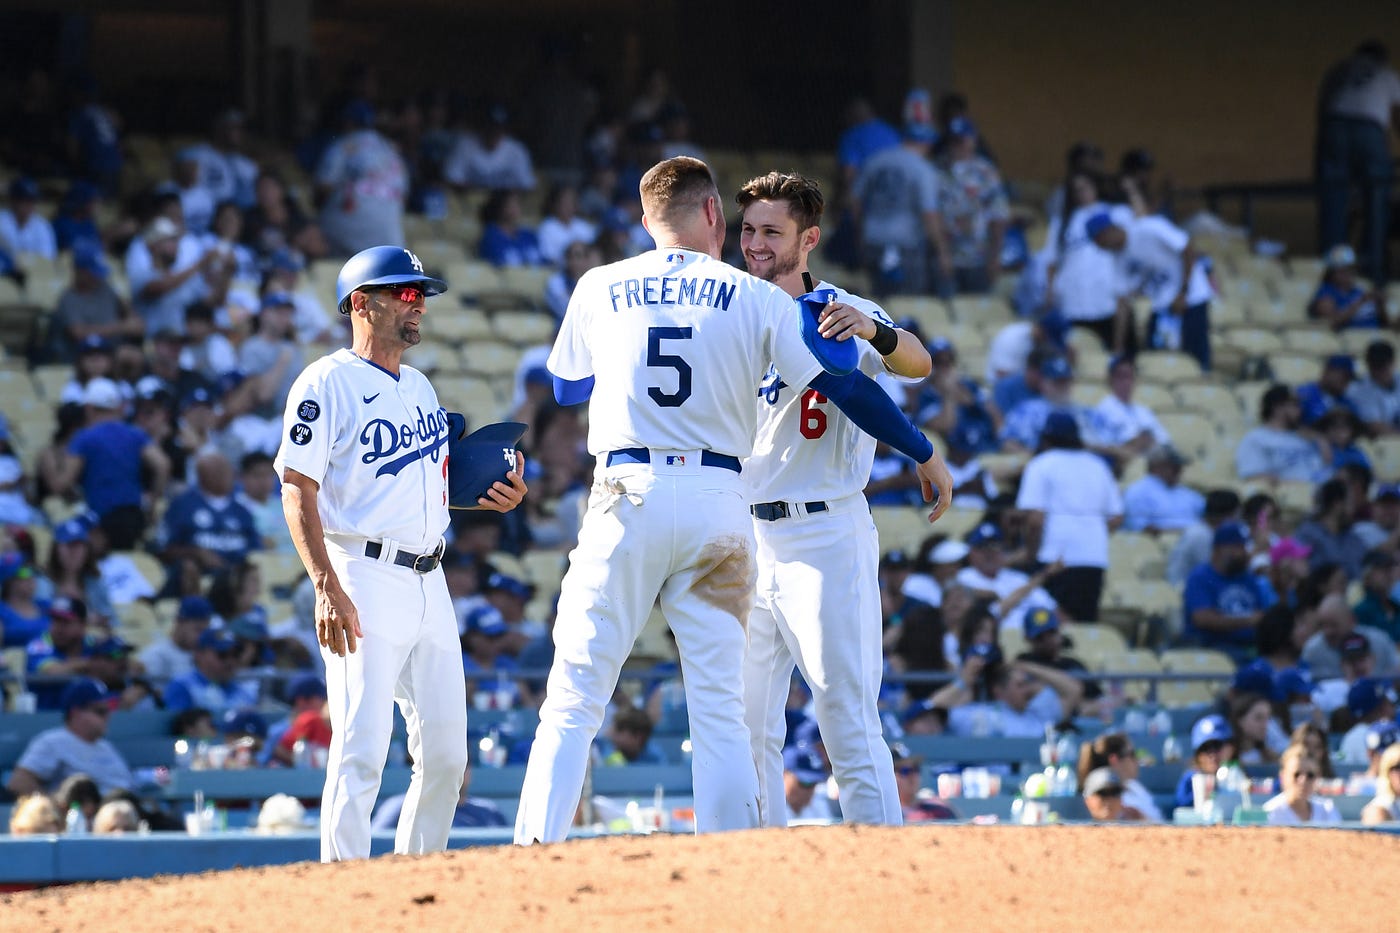 Final score: The Dodgers win 111 games in 2022, by Cary Osborne